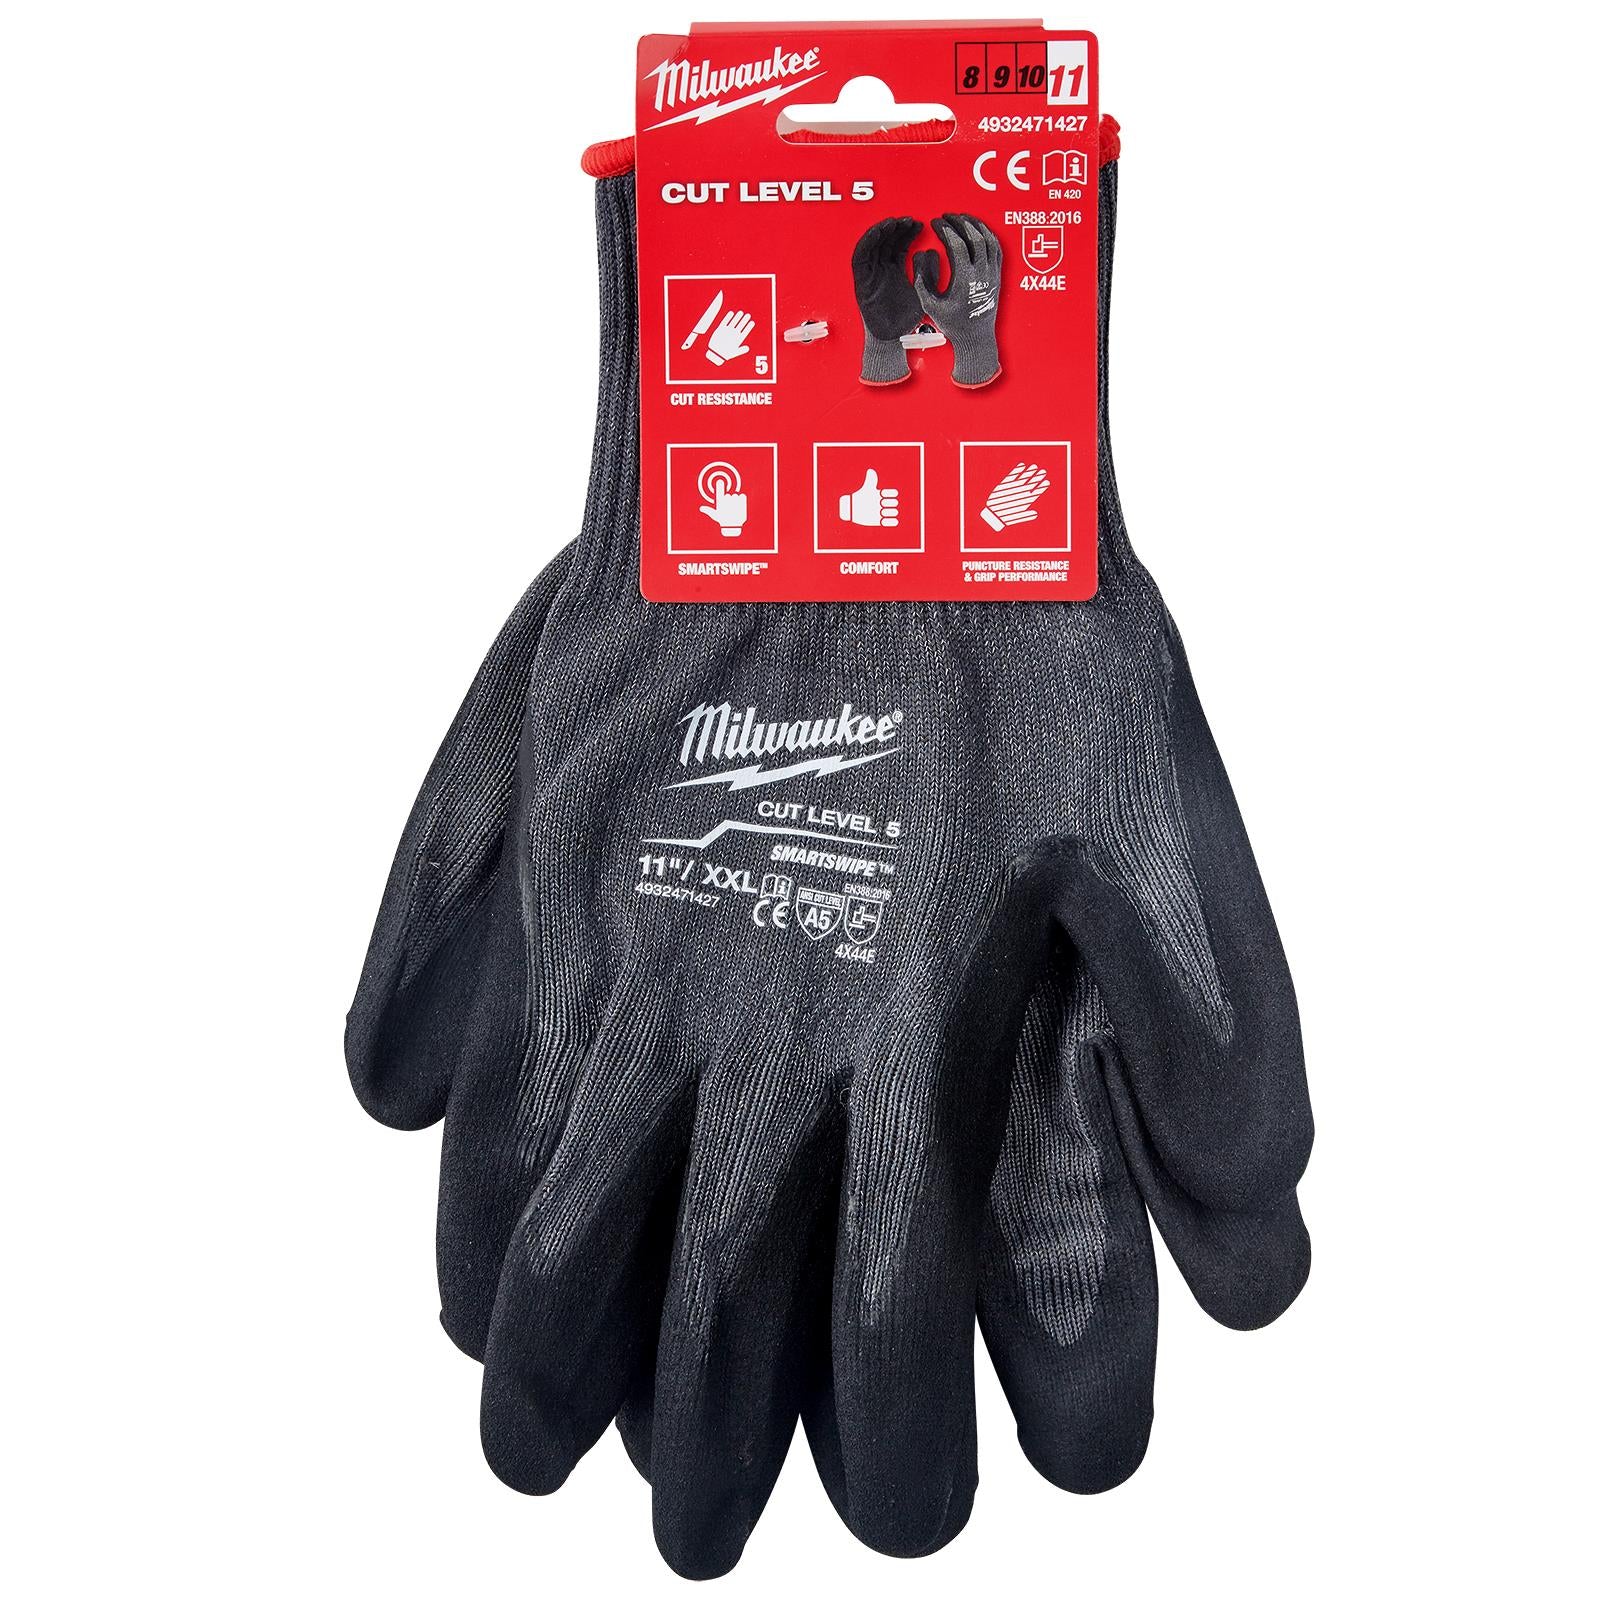 Milwaukee Safety Gloves Cut Level 5/E Dipped Glove Size 11 / XXL Extra Extra Large